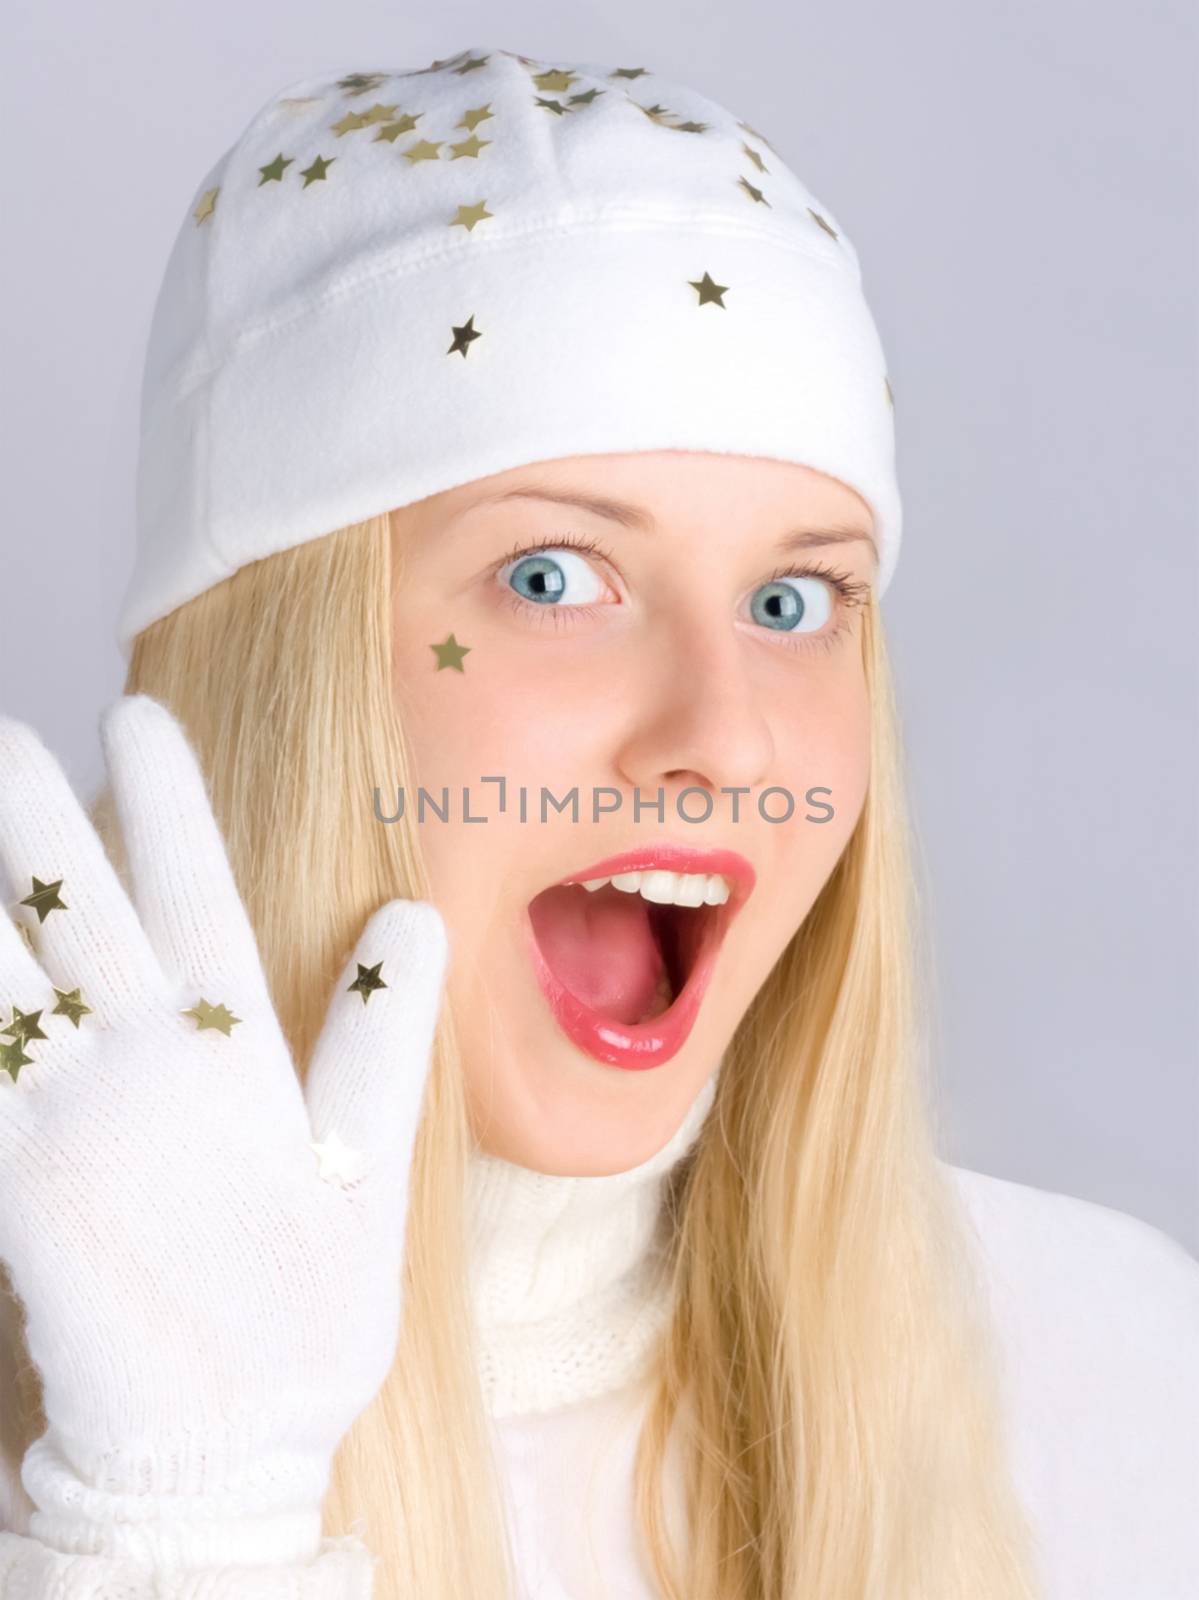 Cheerful blonde girl in Christmas time, woman with positive emotion in winter season for shopping sale and holiday brands